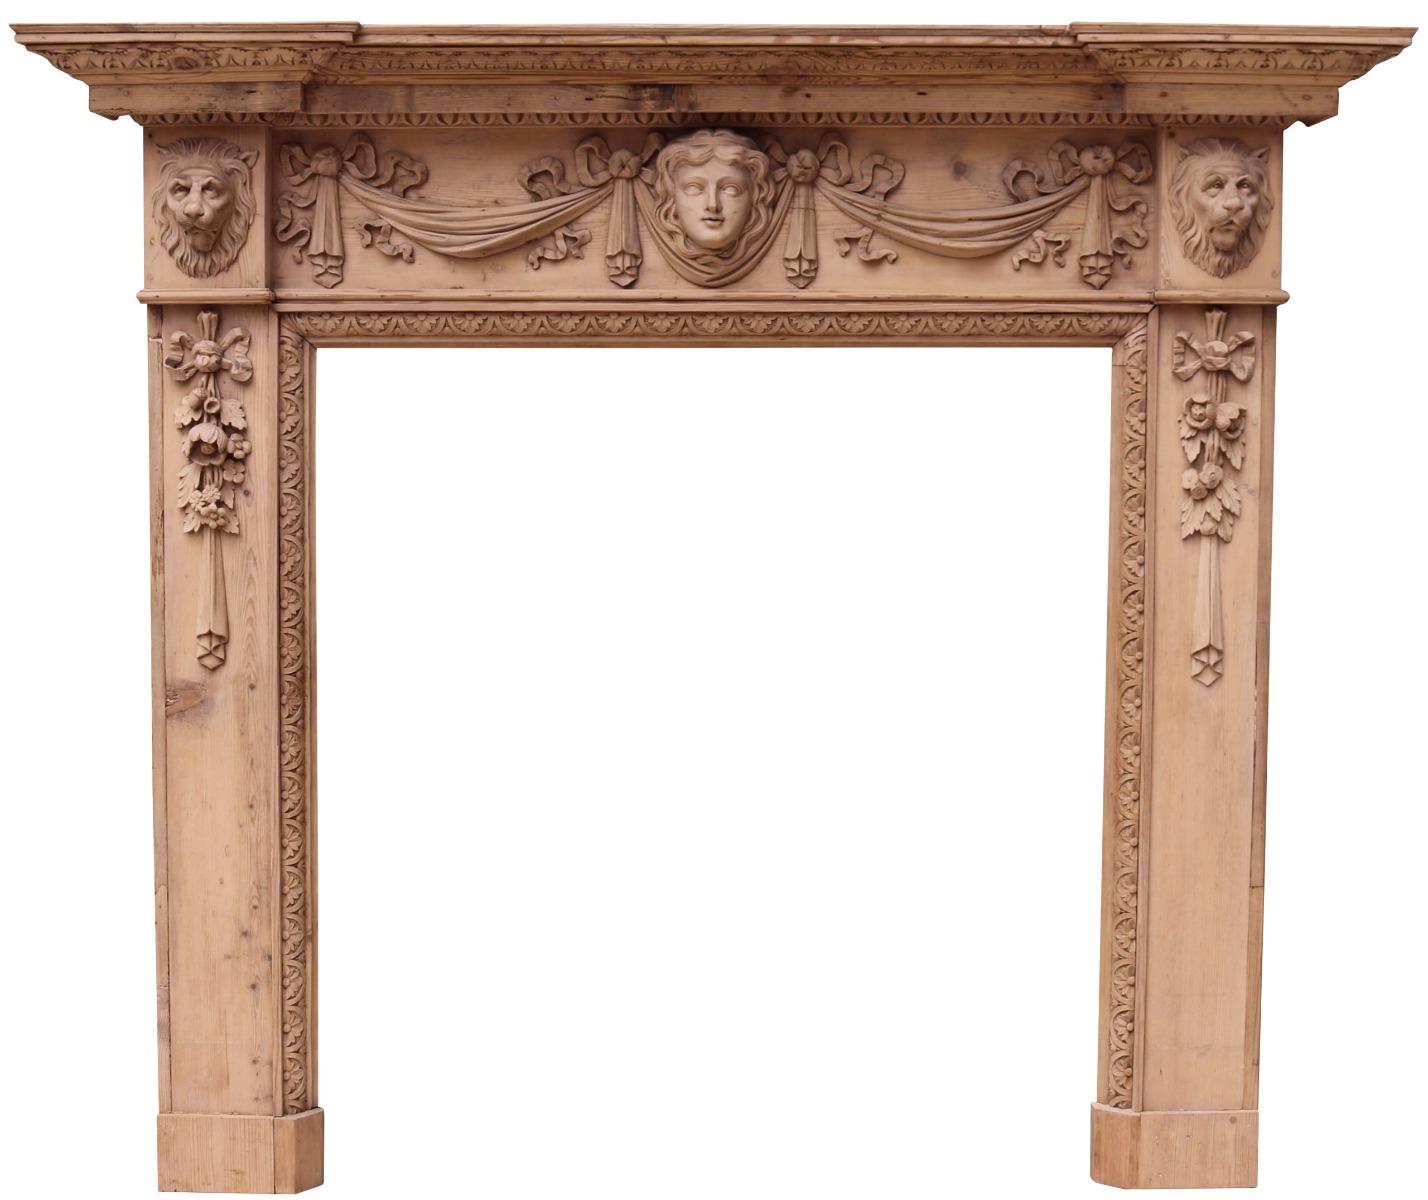 An antique carved pine fire surround in the early Georgian / Palladian style of William Kent. Carved with female mask and drapery to the frieze, lion mask end blocks and drapes to the jambs. Breakfront shelf with egg and dart